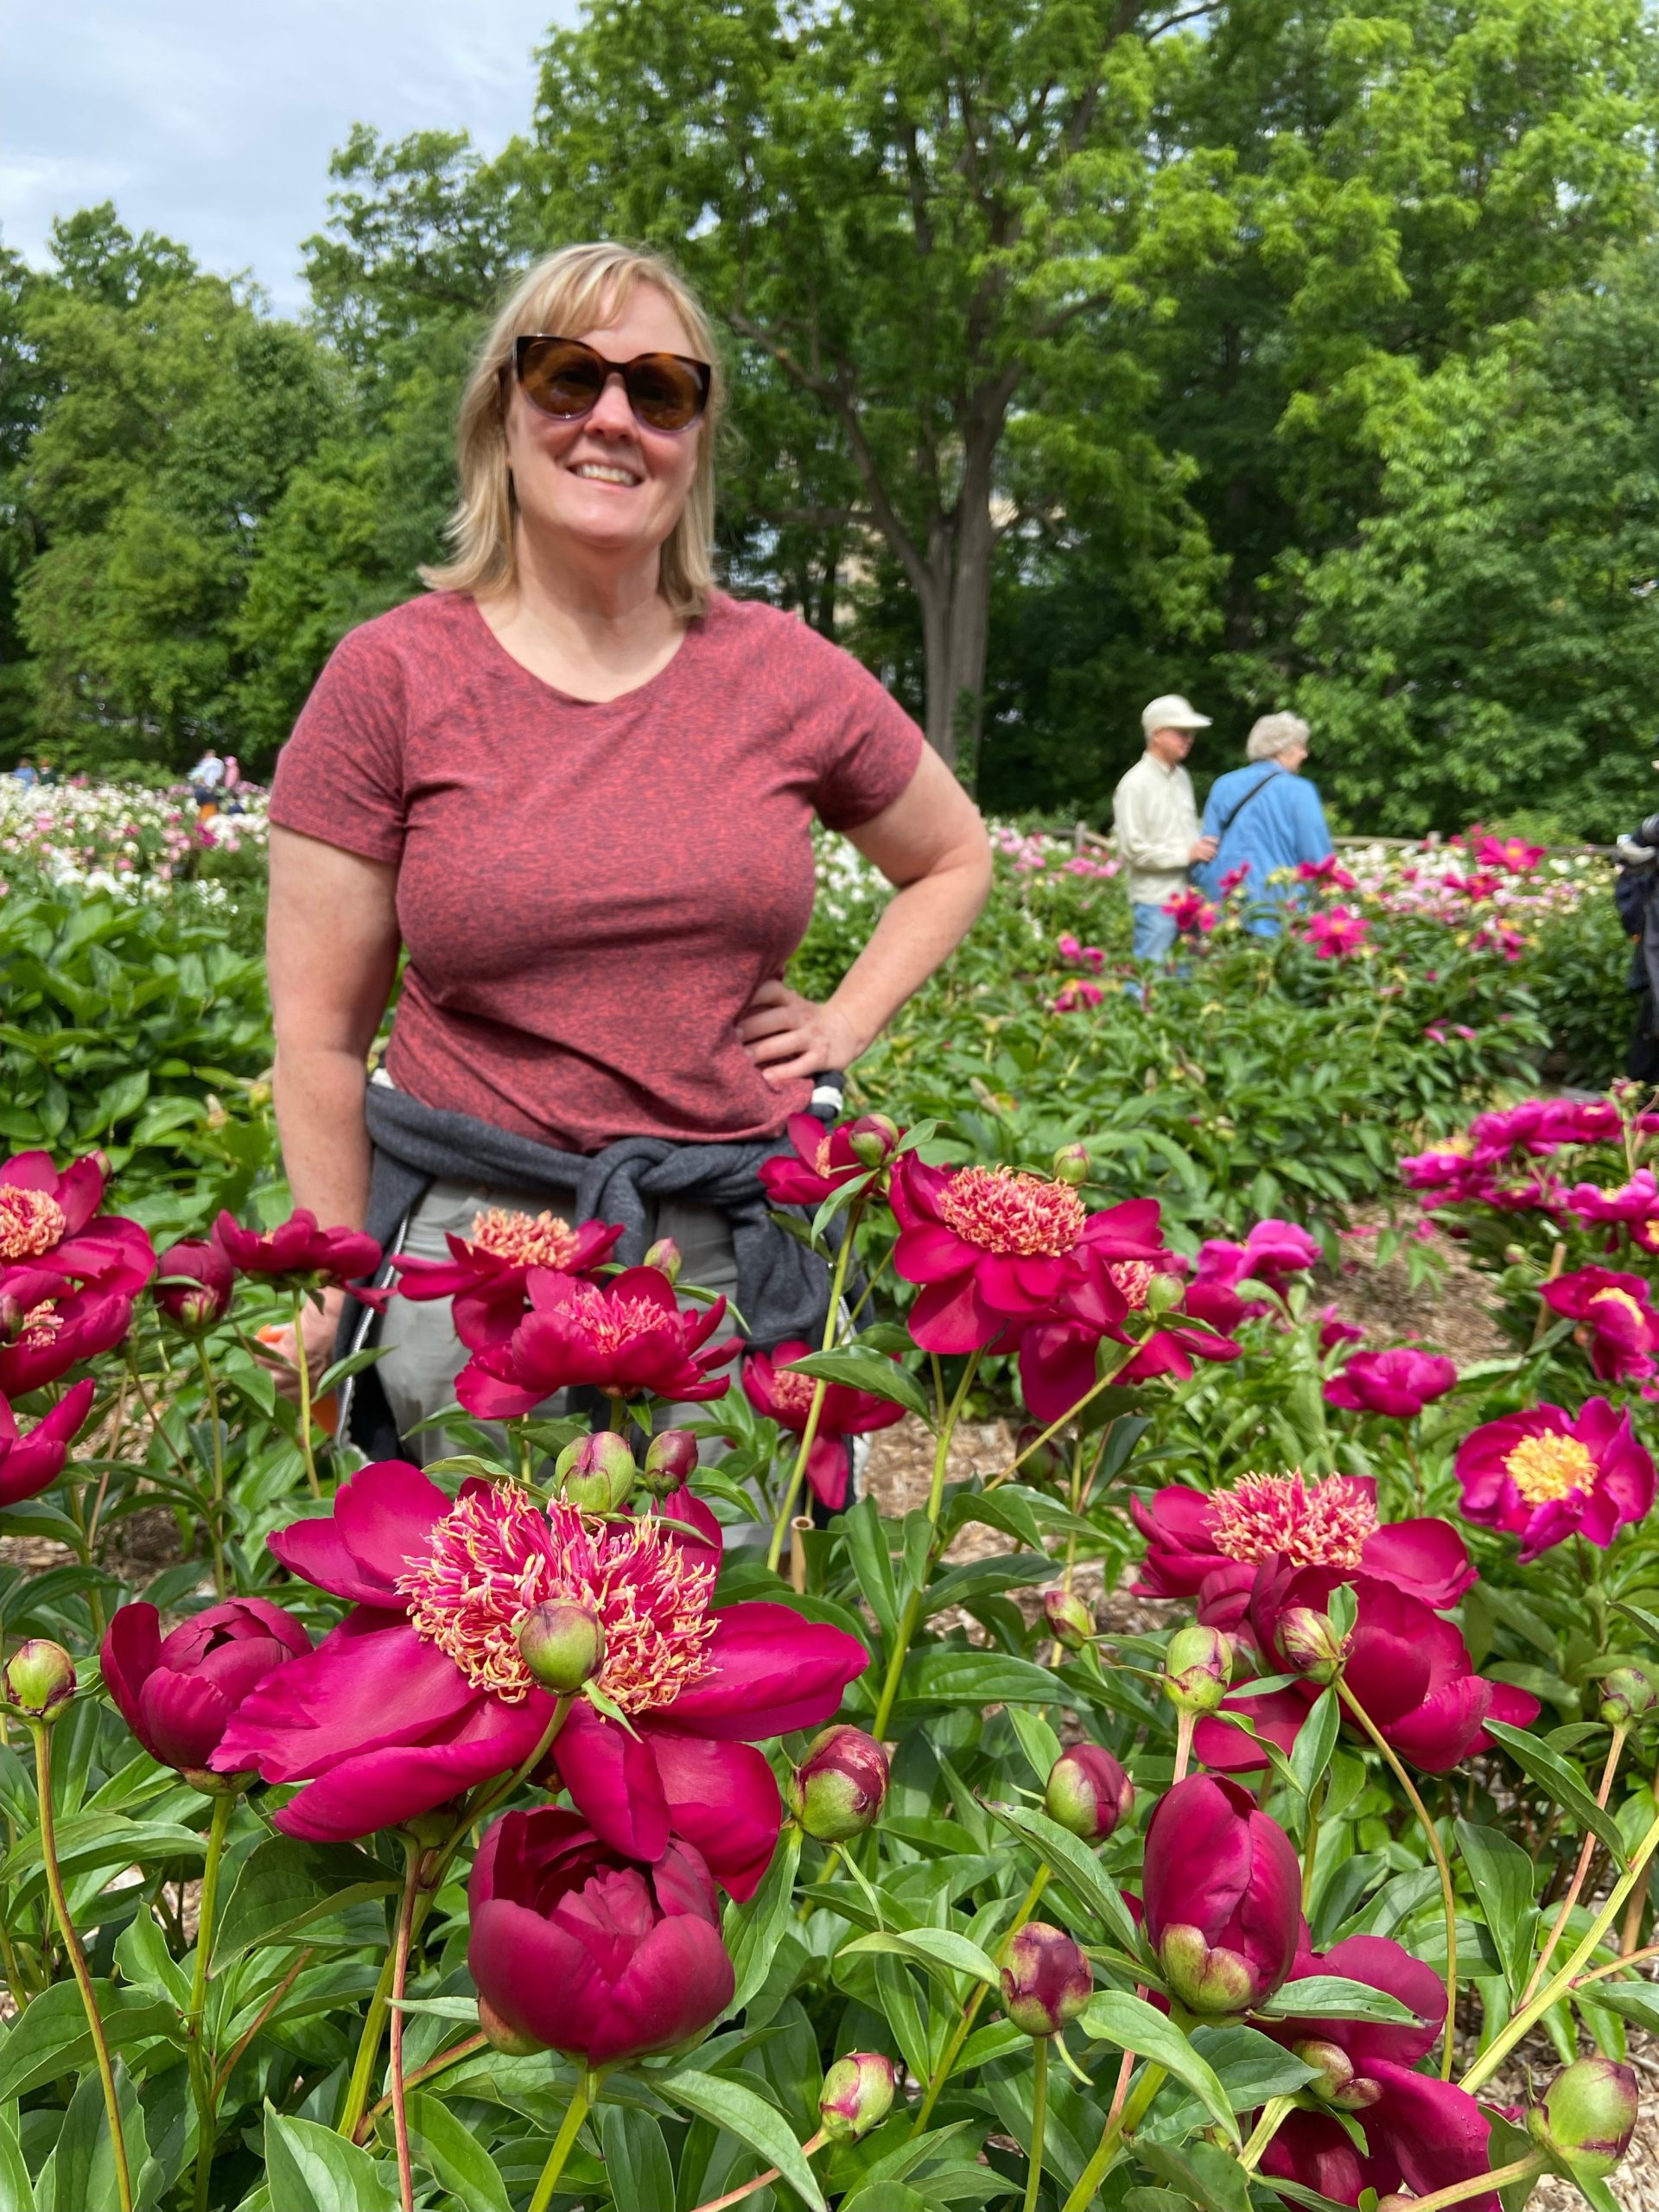 blonde woman named Laurie stands in garden of red peonies